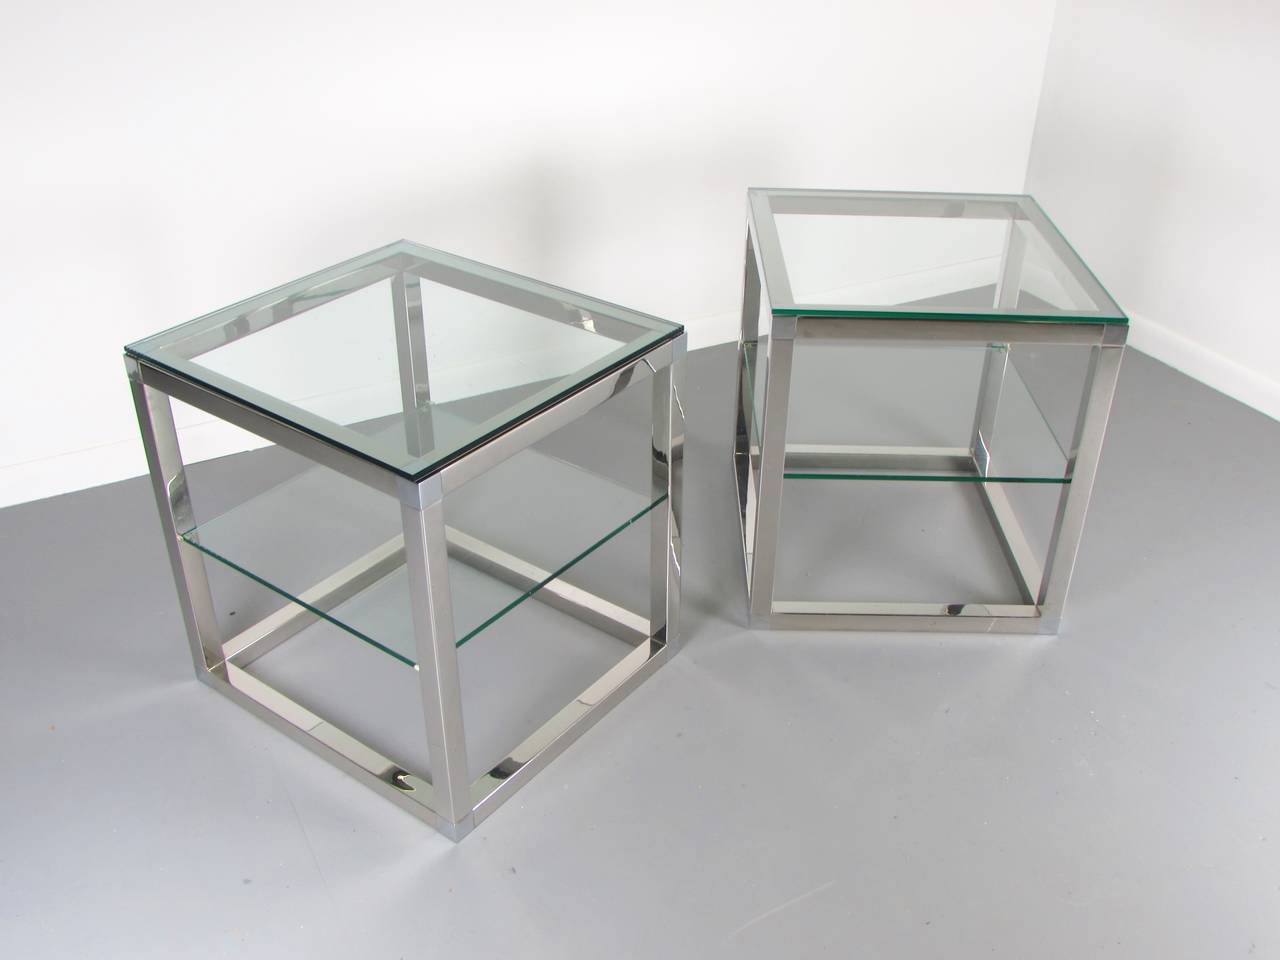 Minimalist chrome cube tables with glass shelves in the style of Milo Baughman, 1970s. These tables are very heavy with solid steel construction. Excellent quality. The chrome is in great condition with minor wear for age. 

We offer free regular